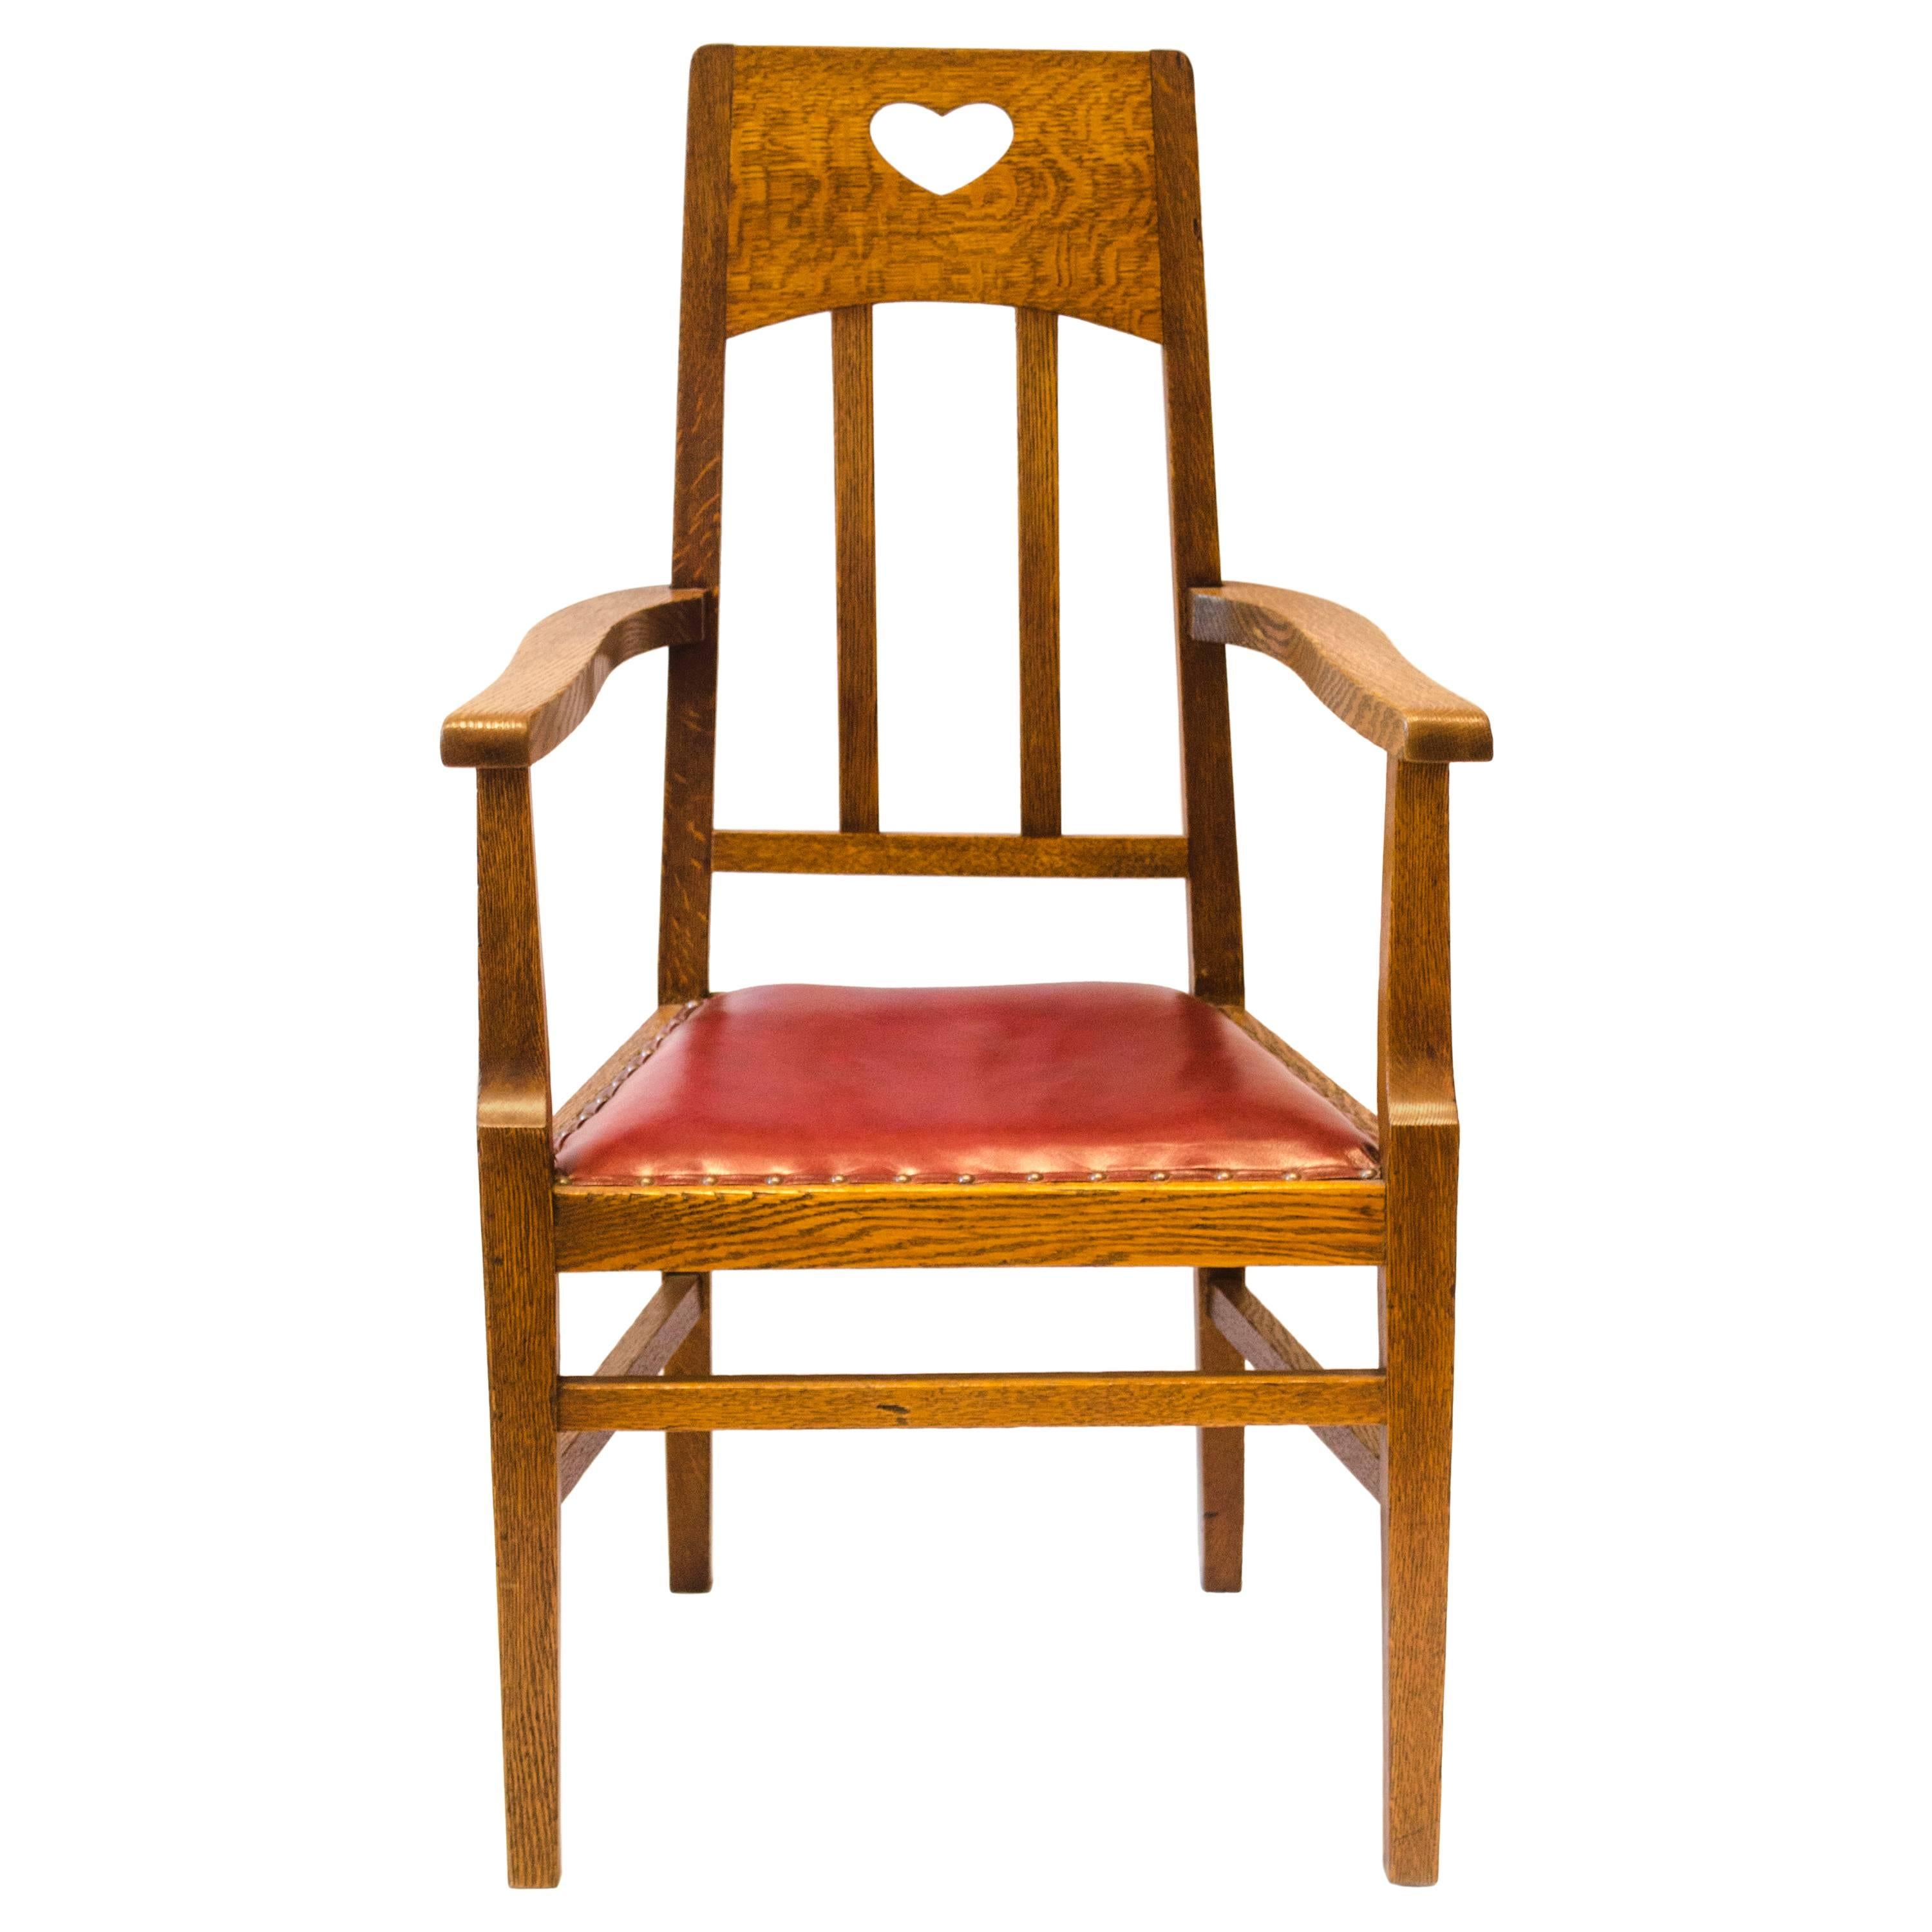 Arts & Crafts Oak Armchair by Jas Shoolbred